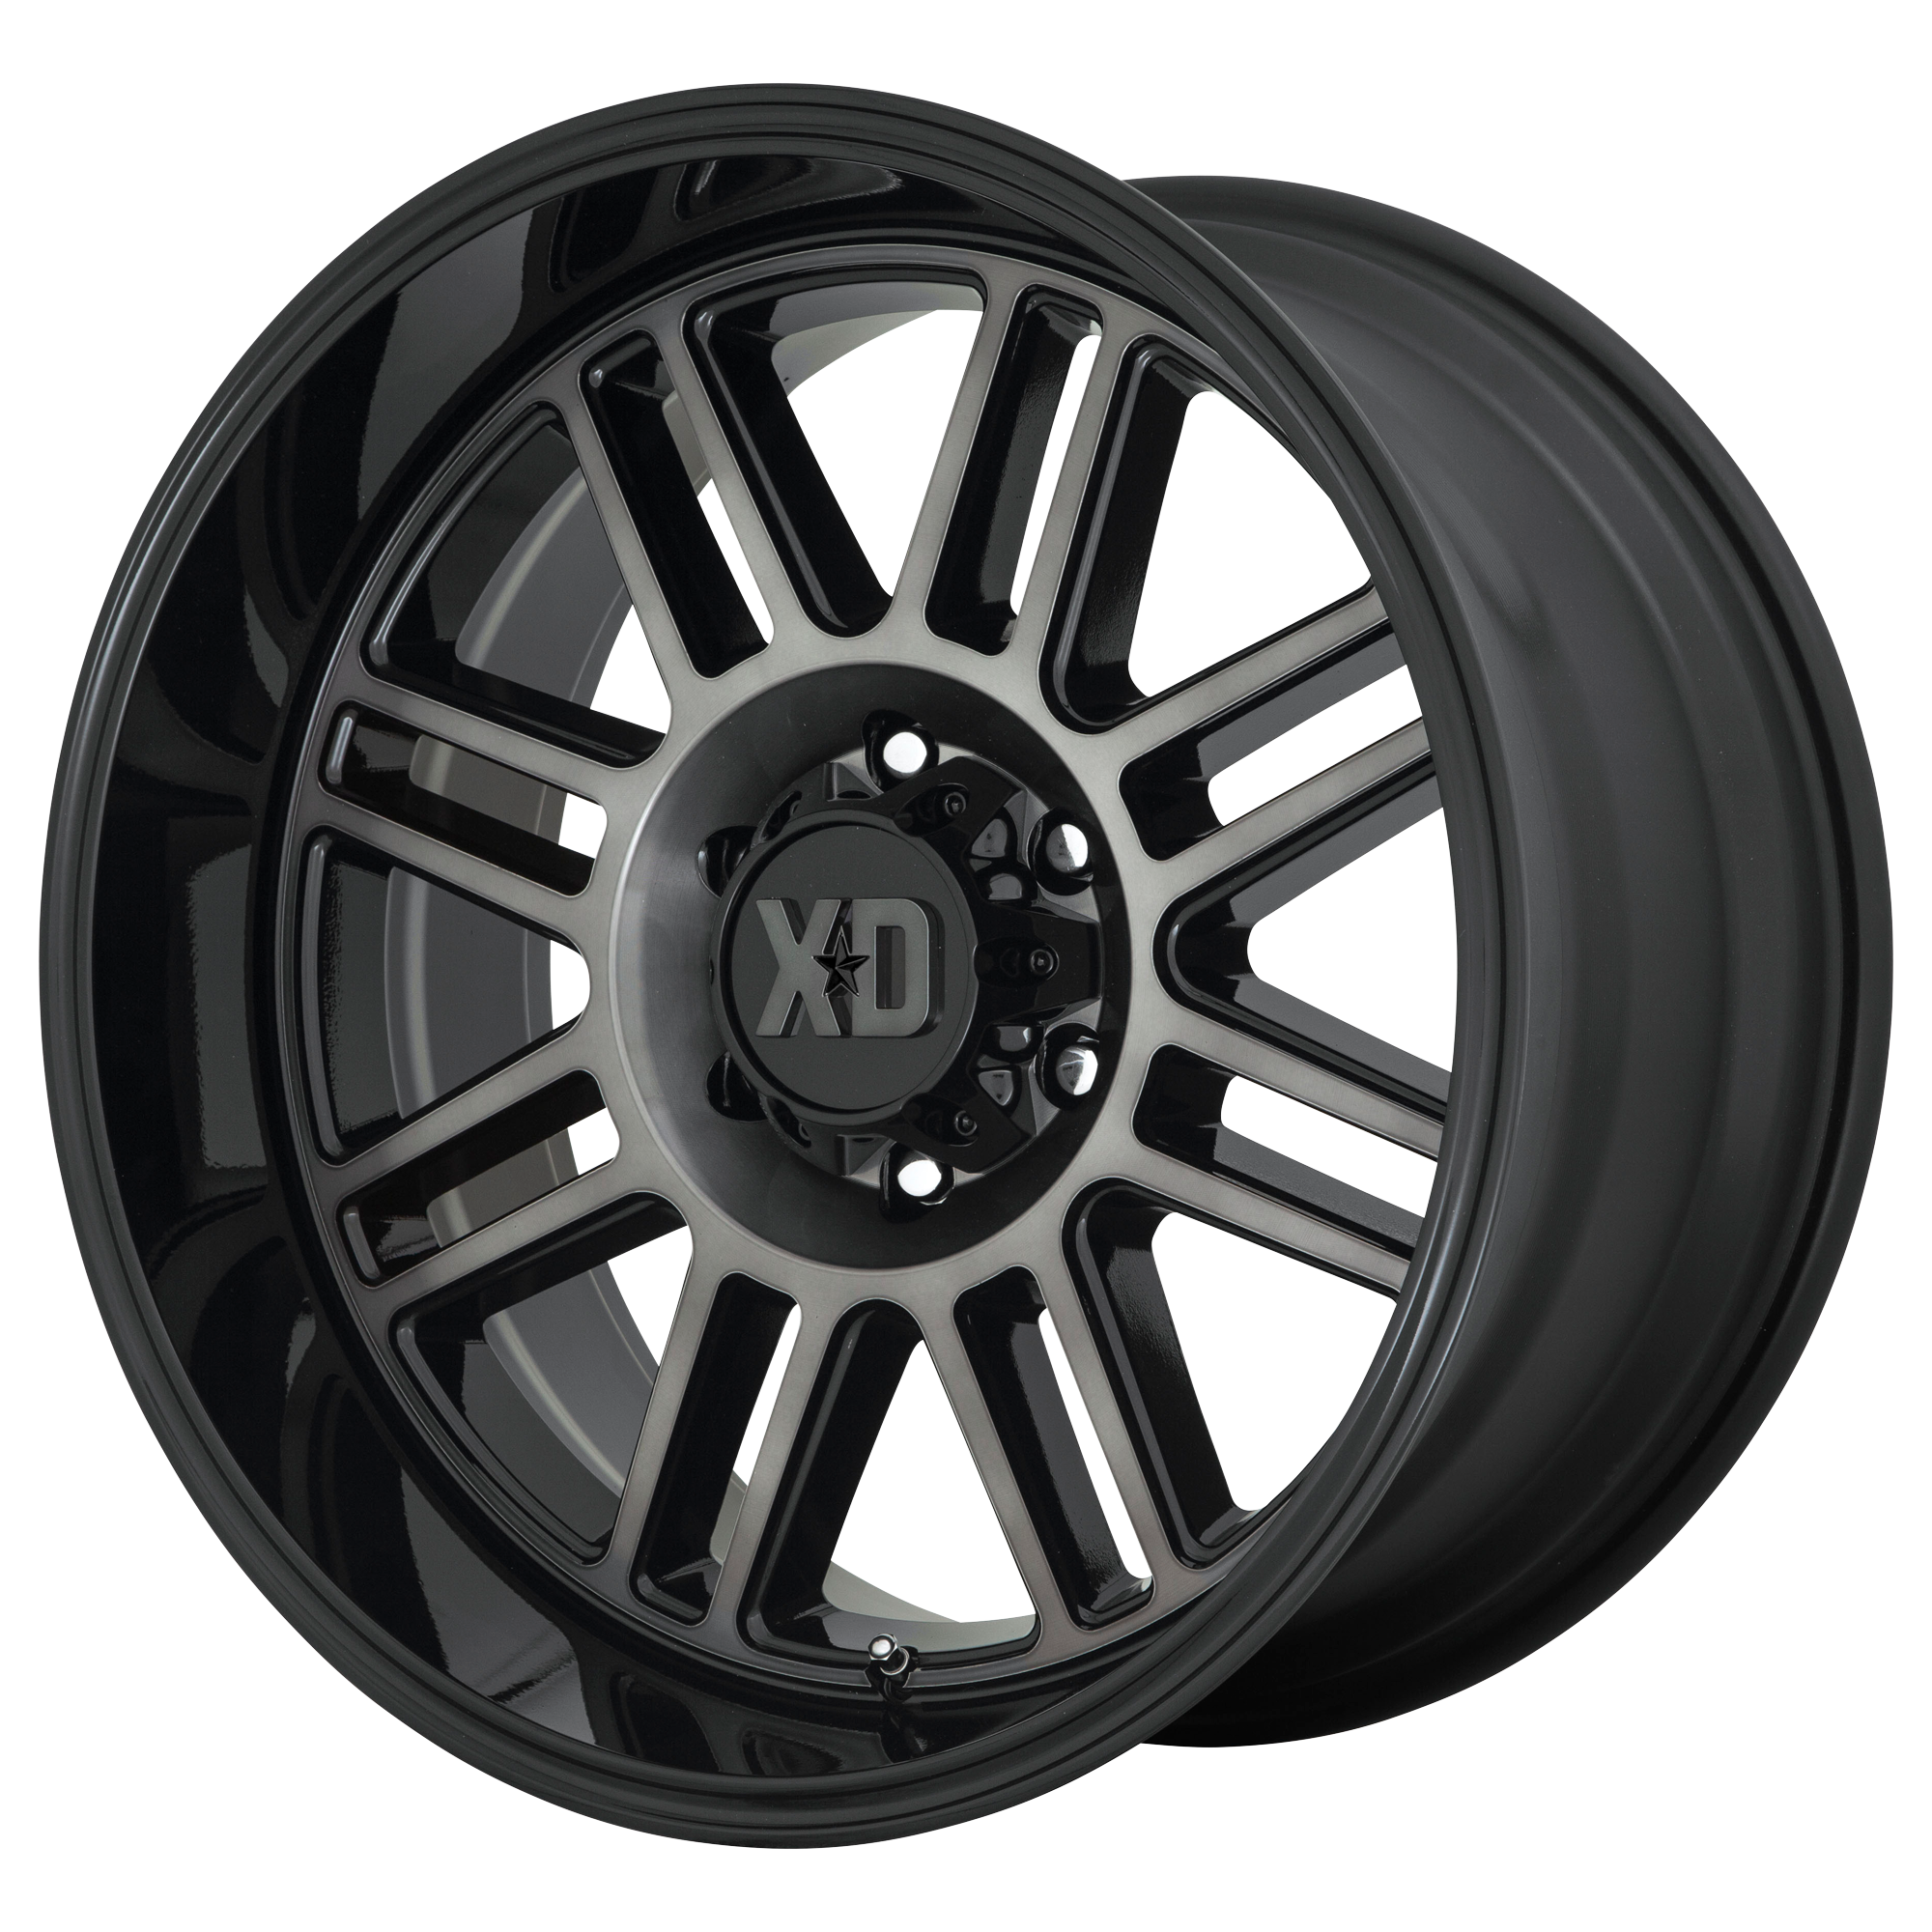 CAGE 20x10 8x170.00 GLOSS BLACK W/ GRAY TINT (-18 mm) - Tires and Engine Performance